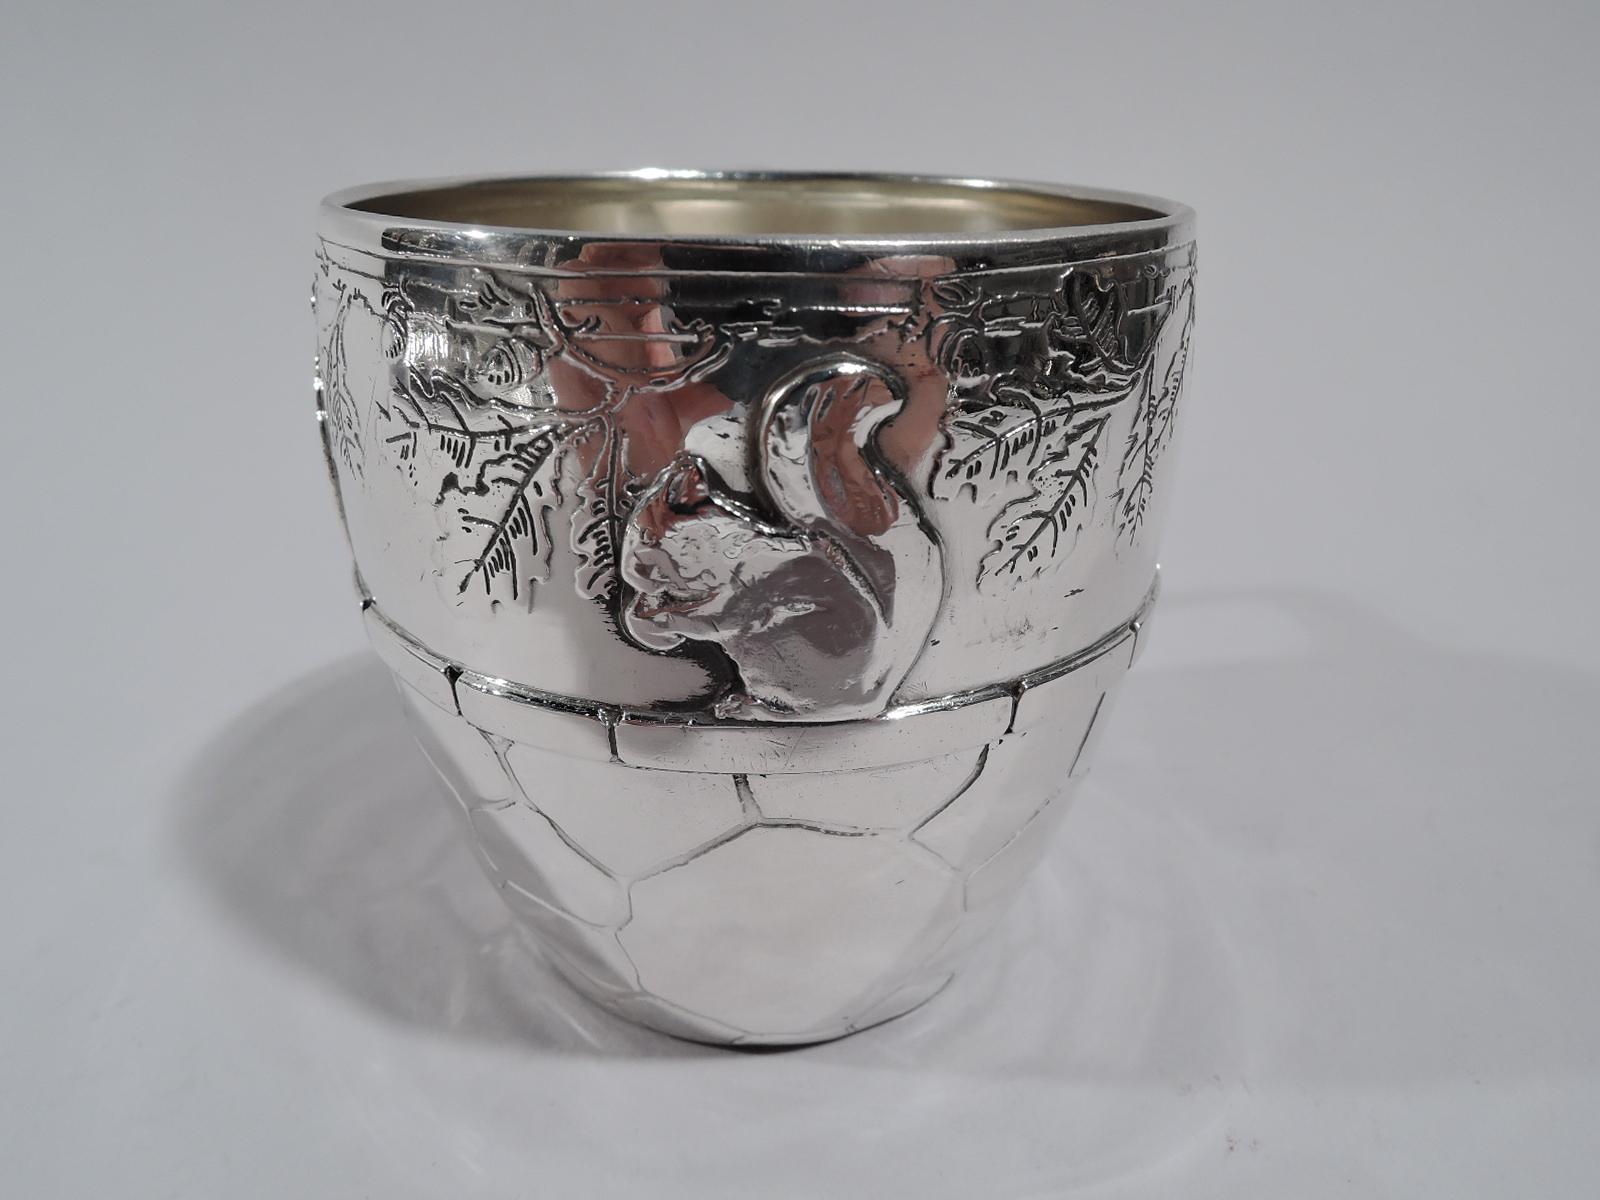 Edwardian sterling silver baby cup. Made by Tiffany & Co. in New York, circa 1911. Barrel form with bracket handle. At top is acid-etched frieze with leafing oak branch and acorn-nibbling squirrels seated on applied flat stone girdle supported by